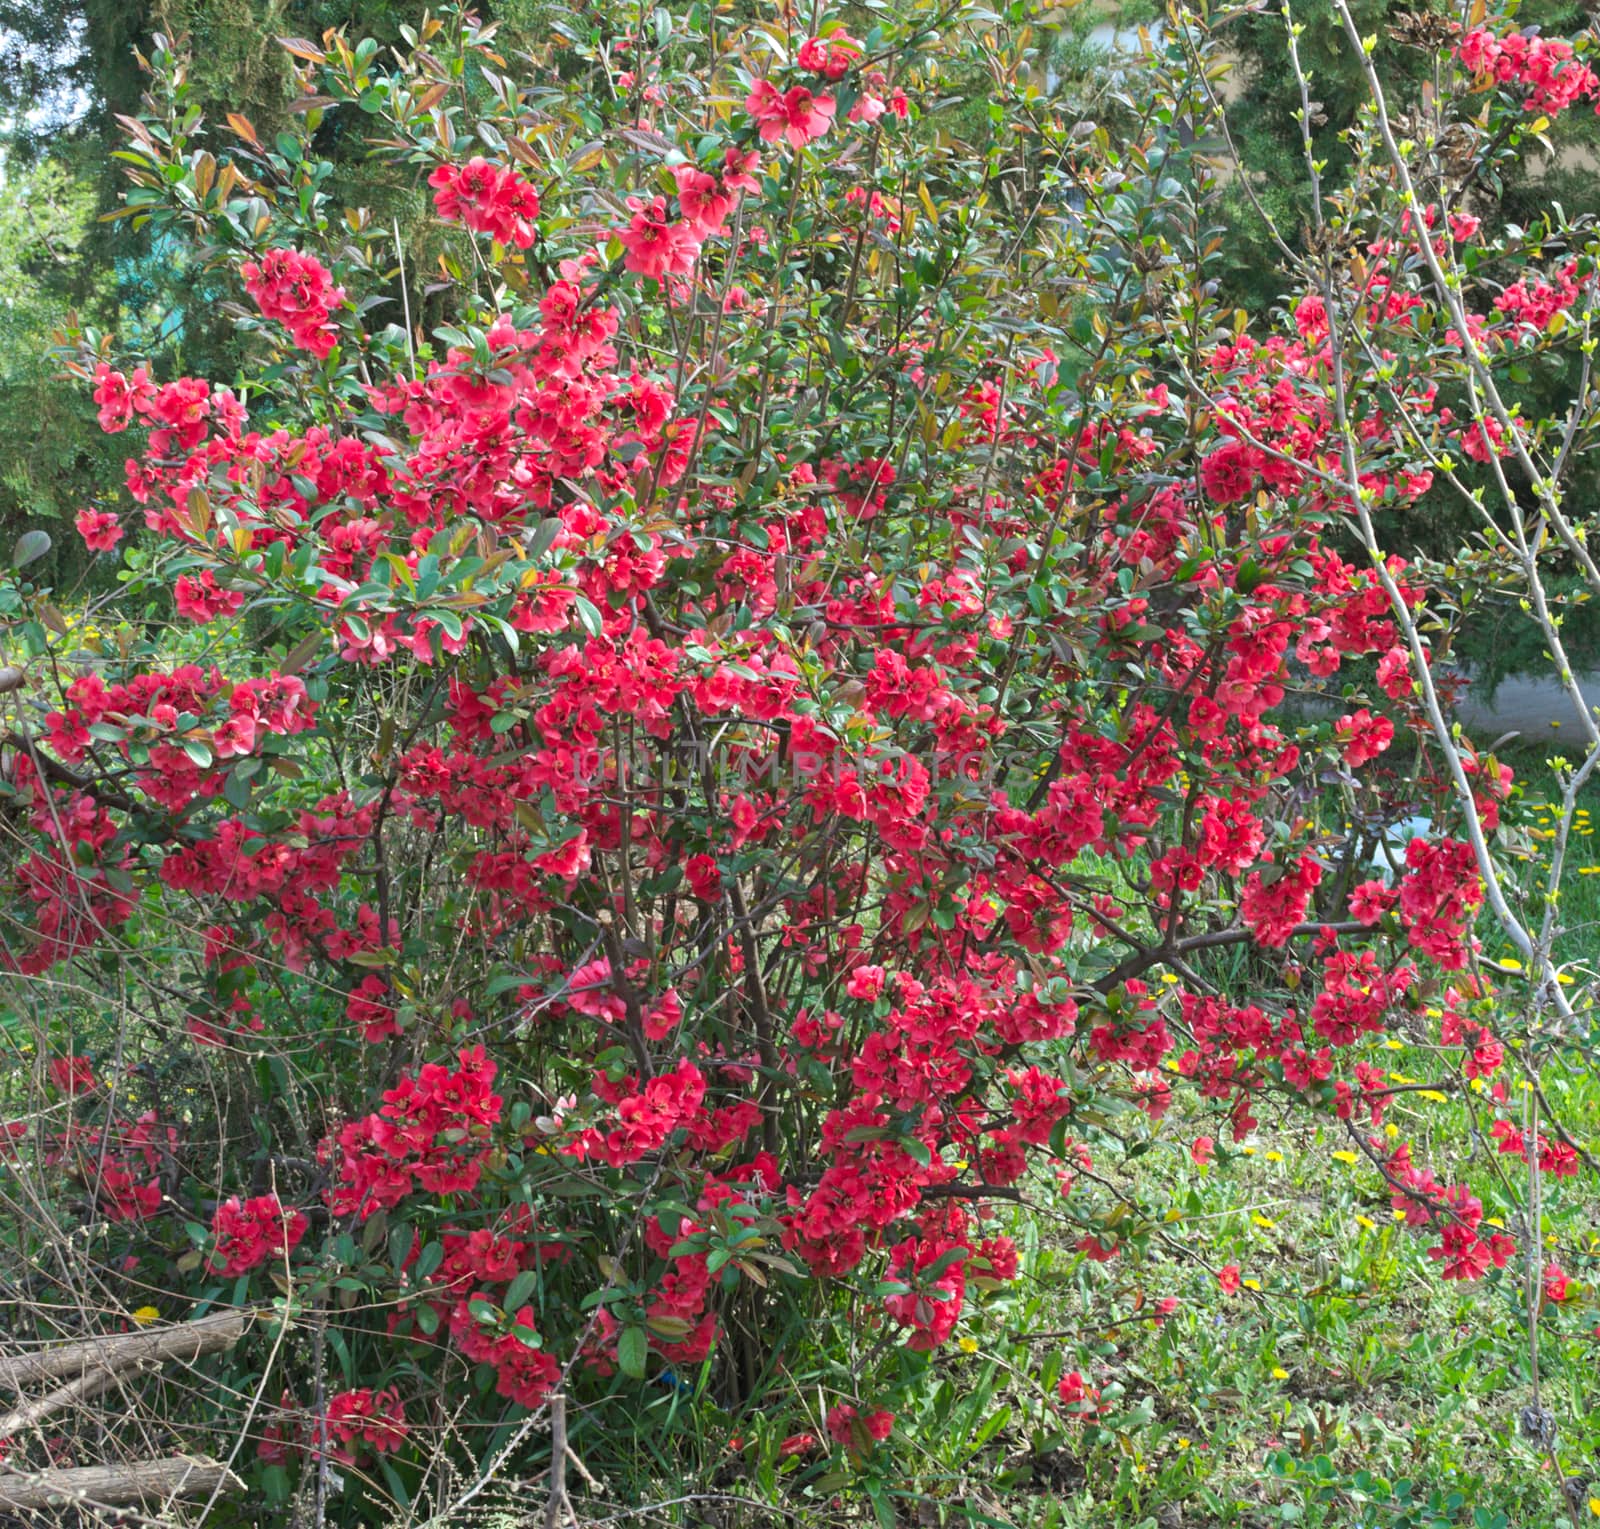 Bush blossoming with red flowers at spring time